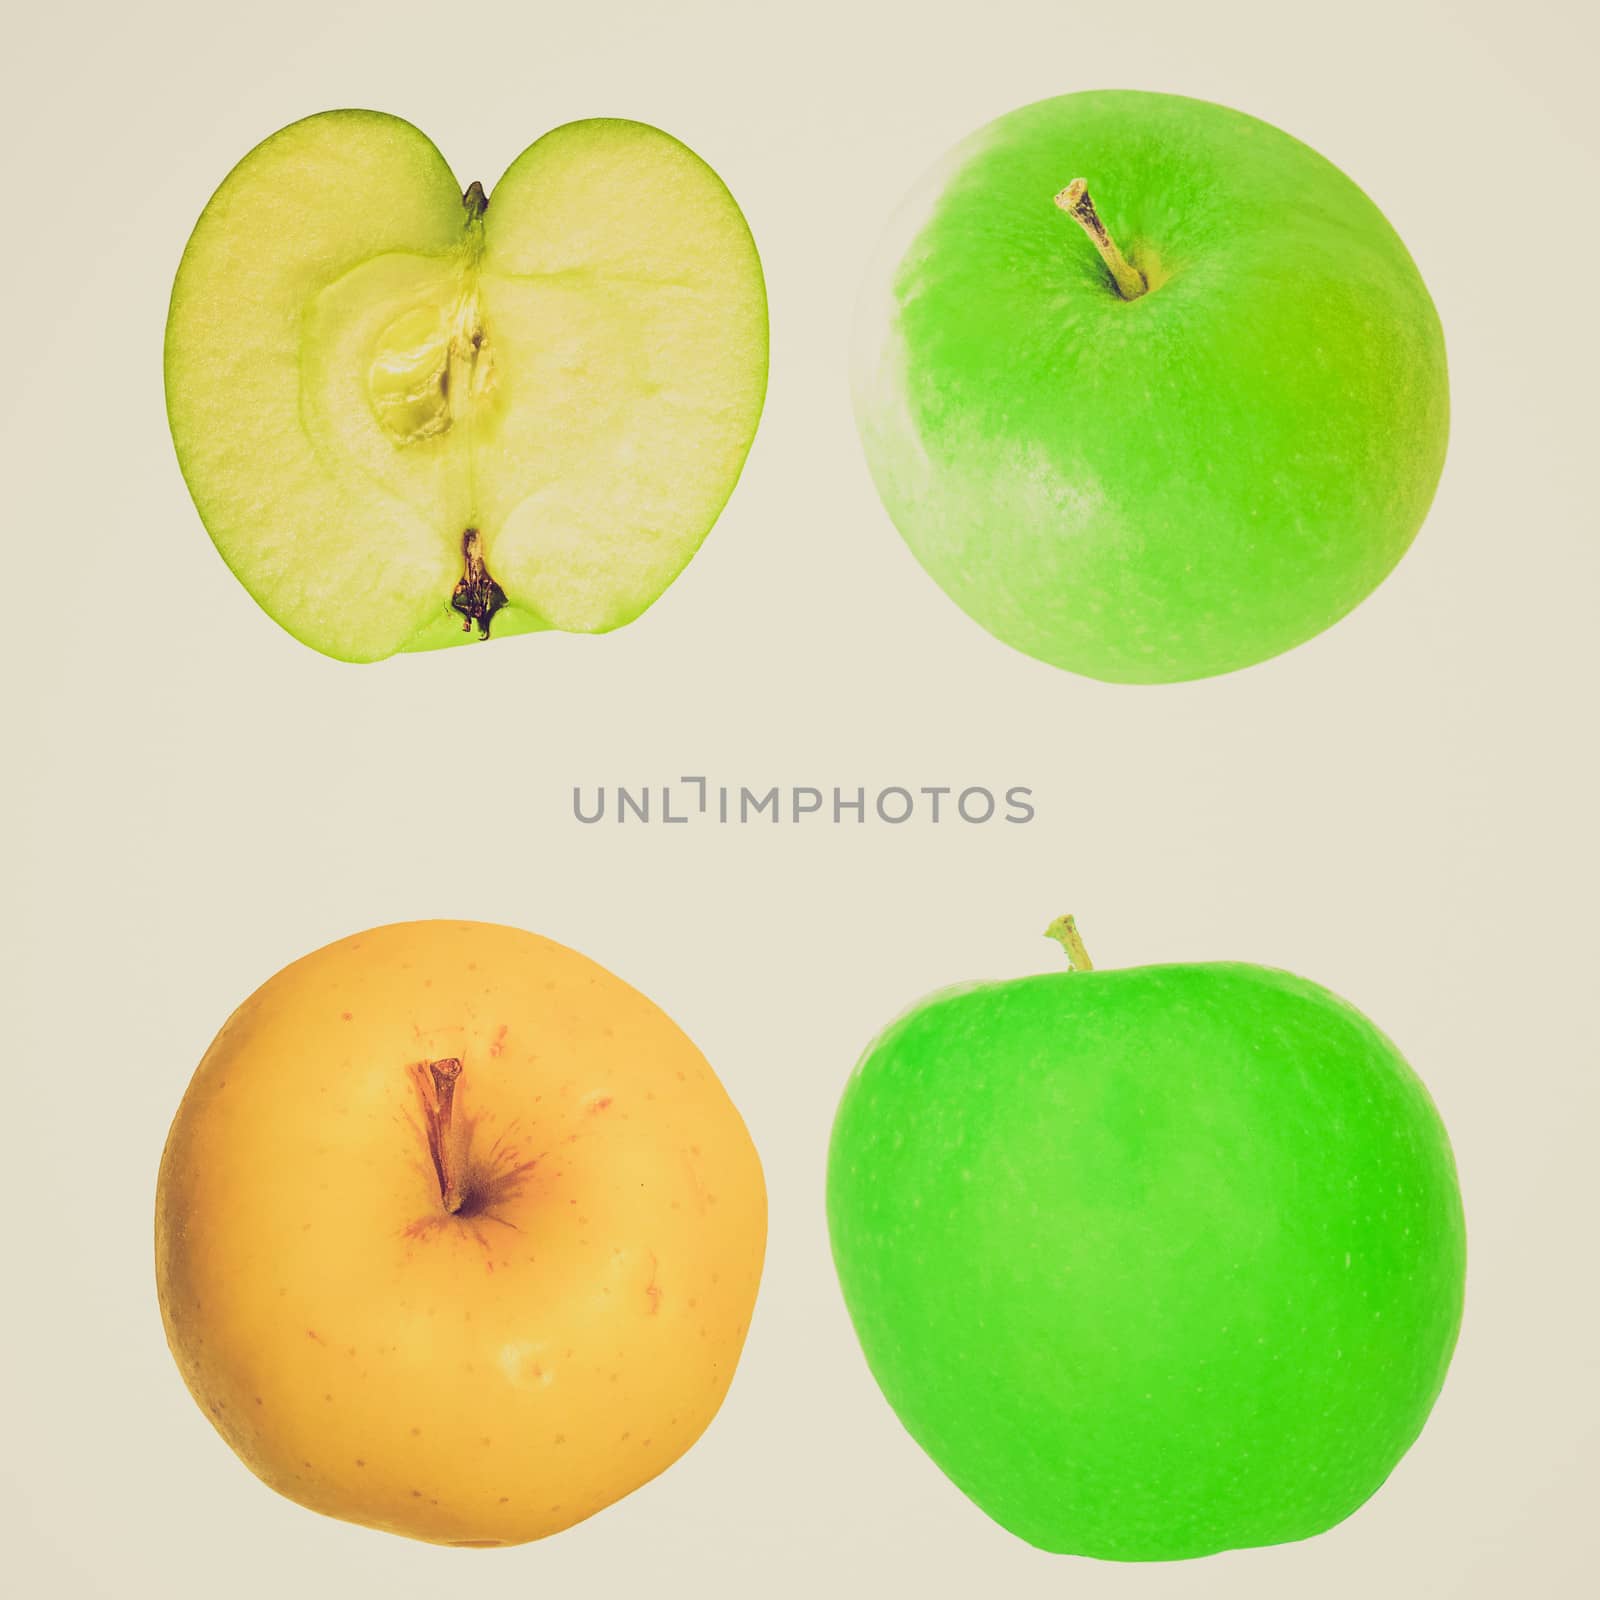 Vintage retro looking Many apples isolated over a white background